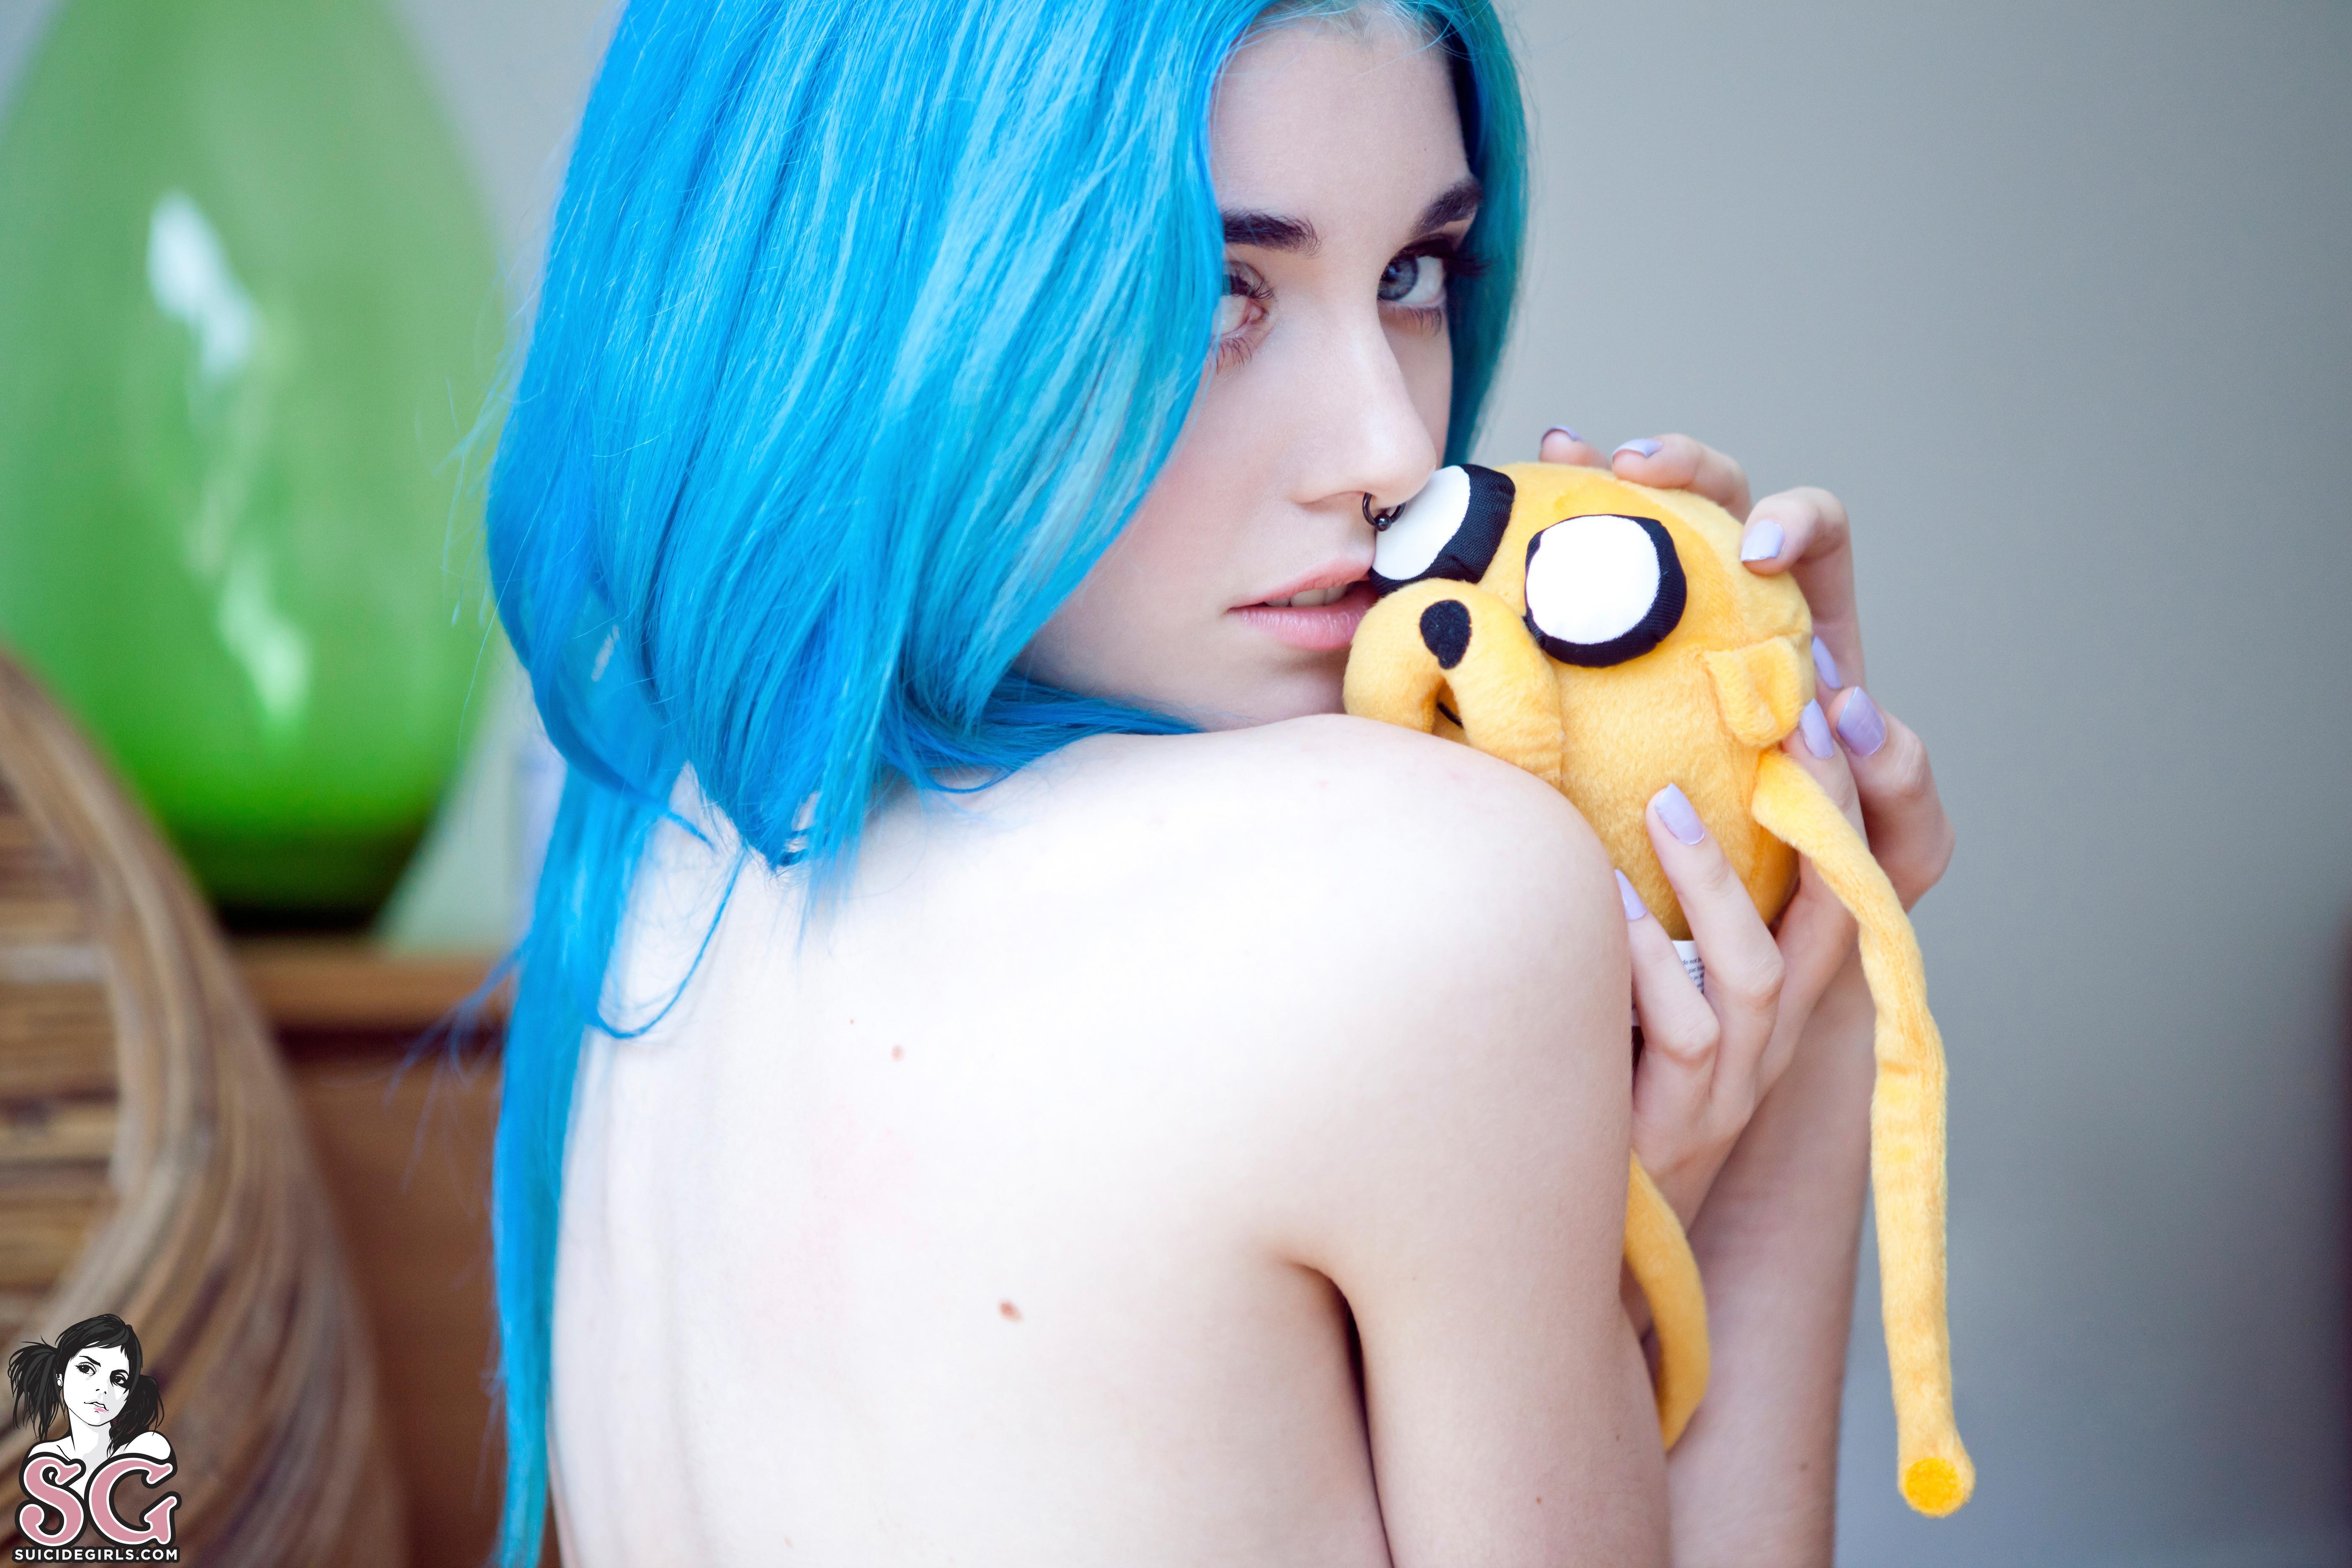 People 5616x3744 Yuxi Suicide blue eyes back dyed hair nose ring pale pornstar blue hair women Suicide Girls women indoors indoors looking at viewer cyan hair Spanish Spanish women nude watermarked closeup